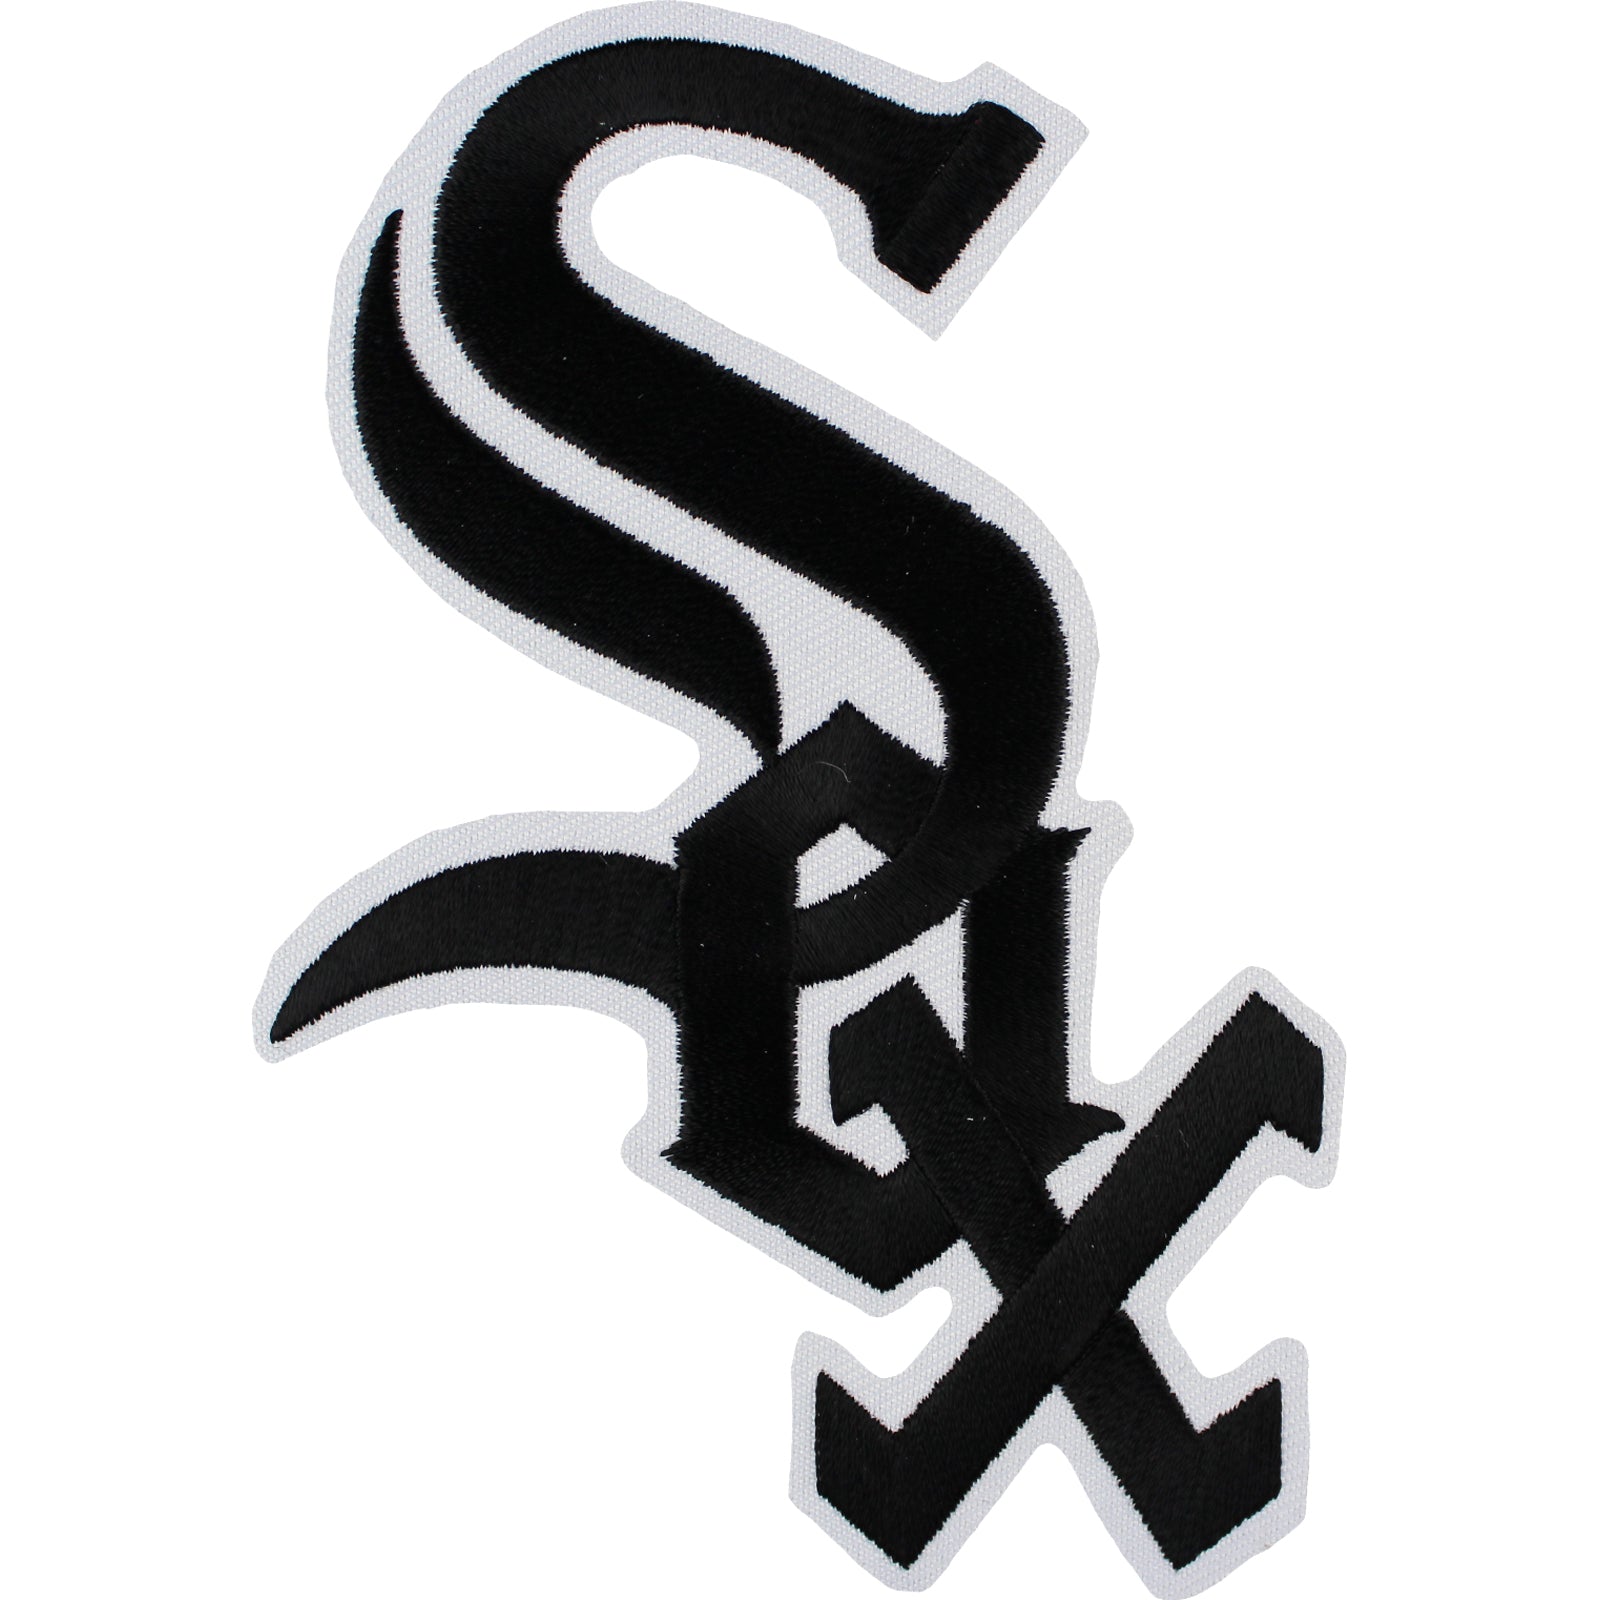 White Sox Add “MR” Patch to Jersey Sleeves – SportsLogos.Net News